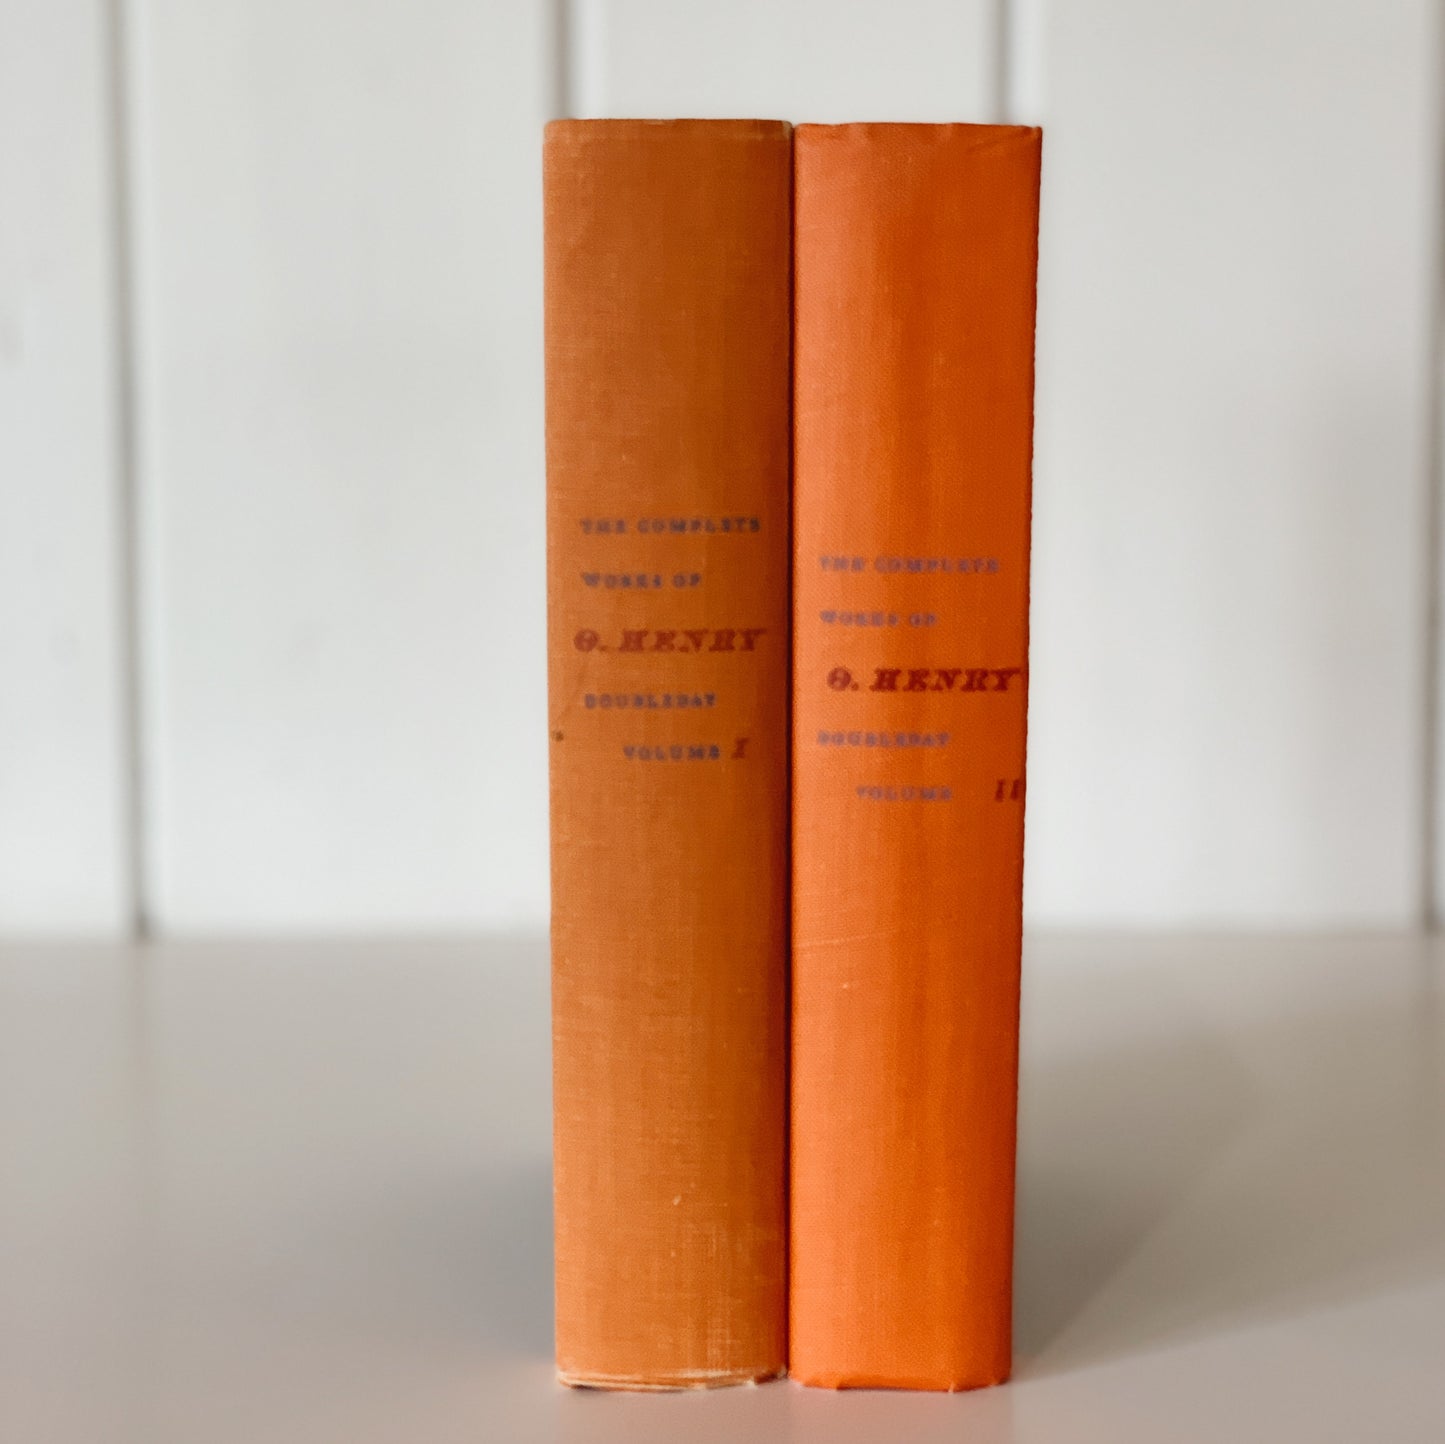 The Complete Works of O. Henry, Volumes 1-2, 1953, Orange Hardcover